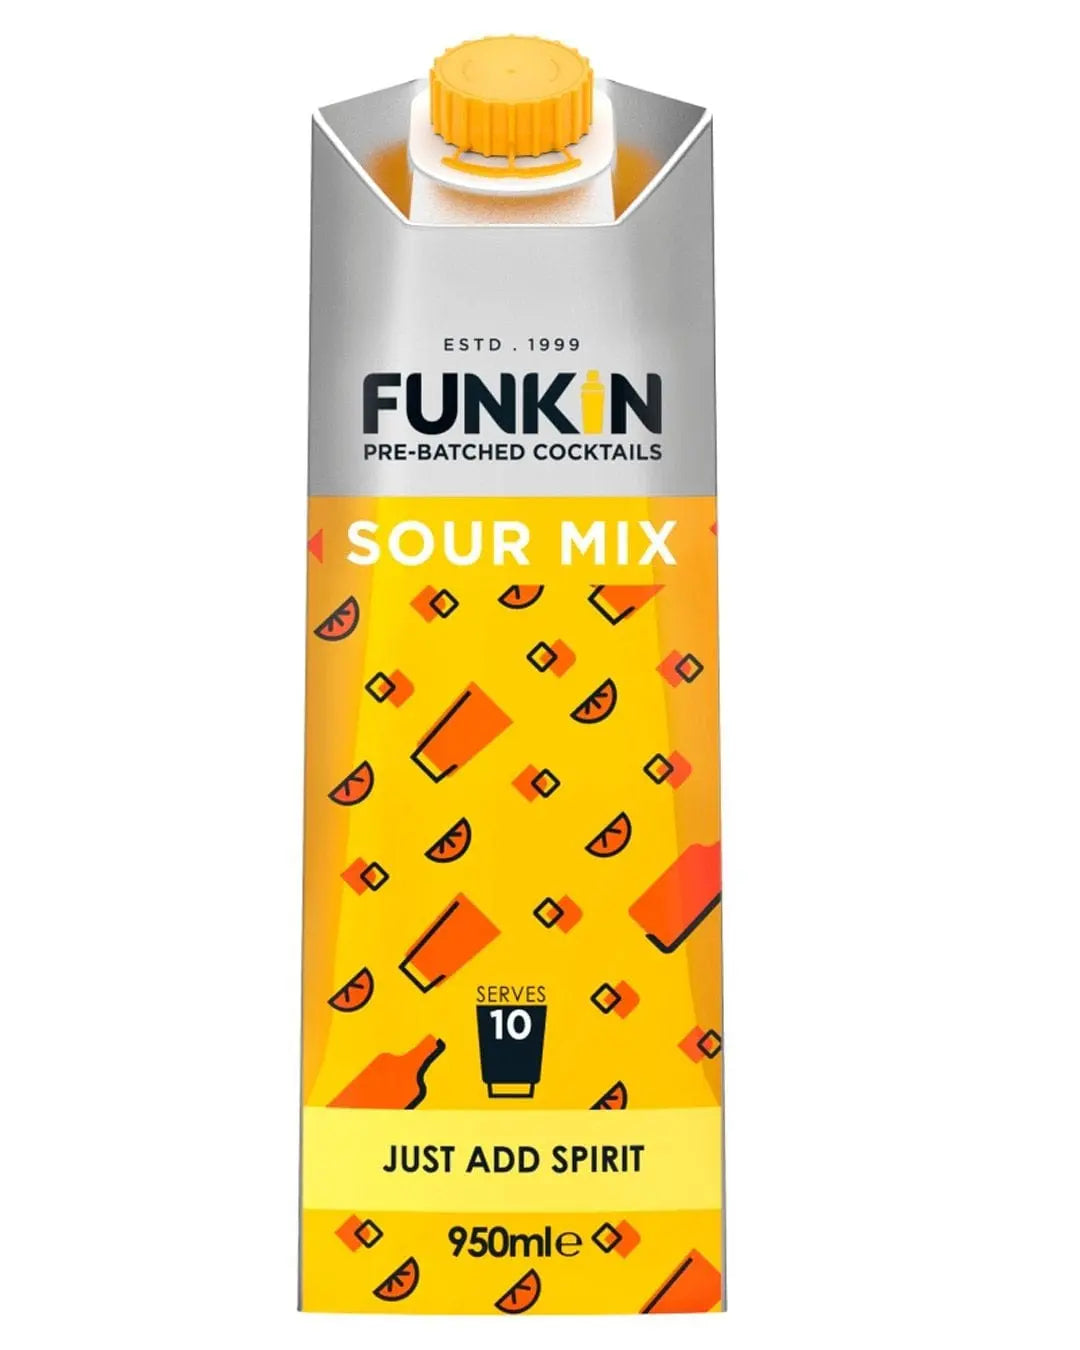 Funkin Sour Mix Cocktail Carton, 950 ml Ready Made Cocktails 5060065300069